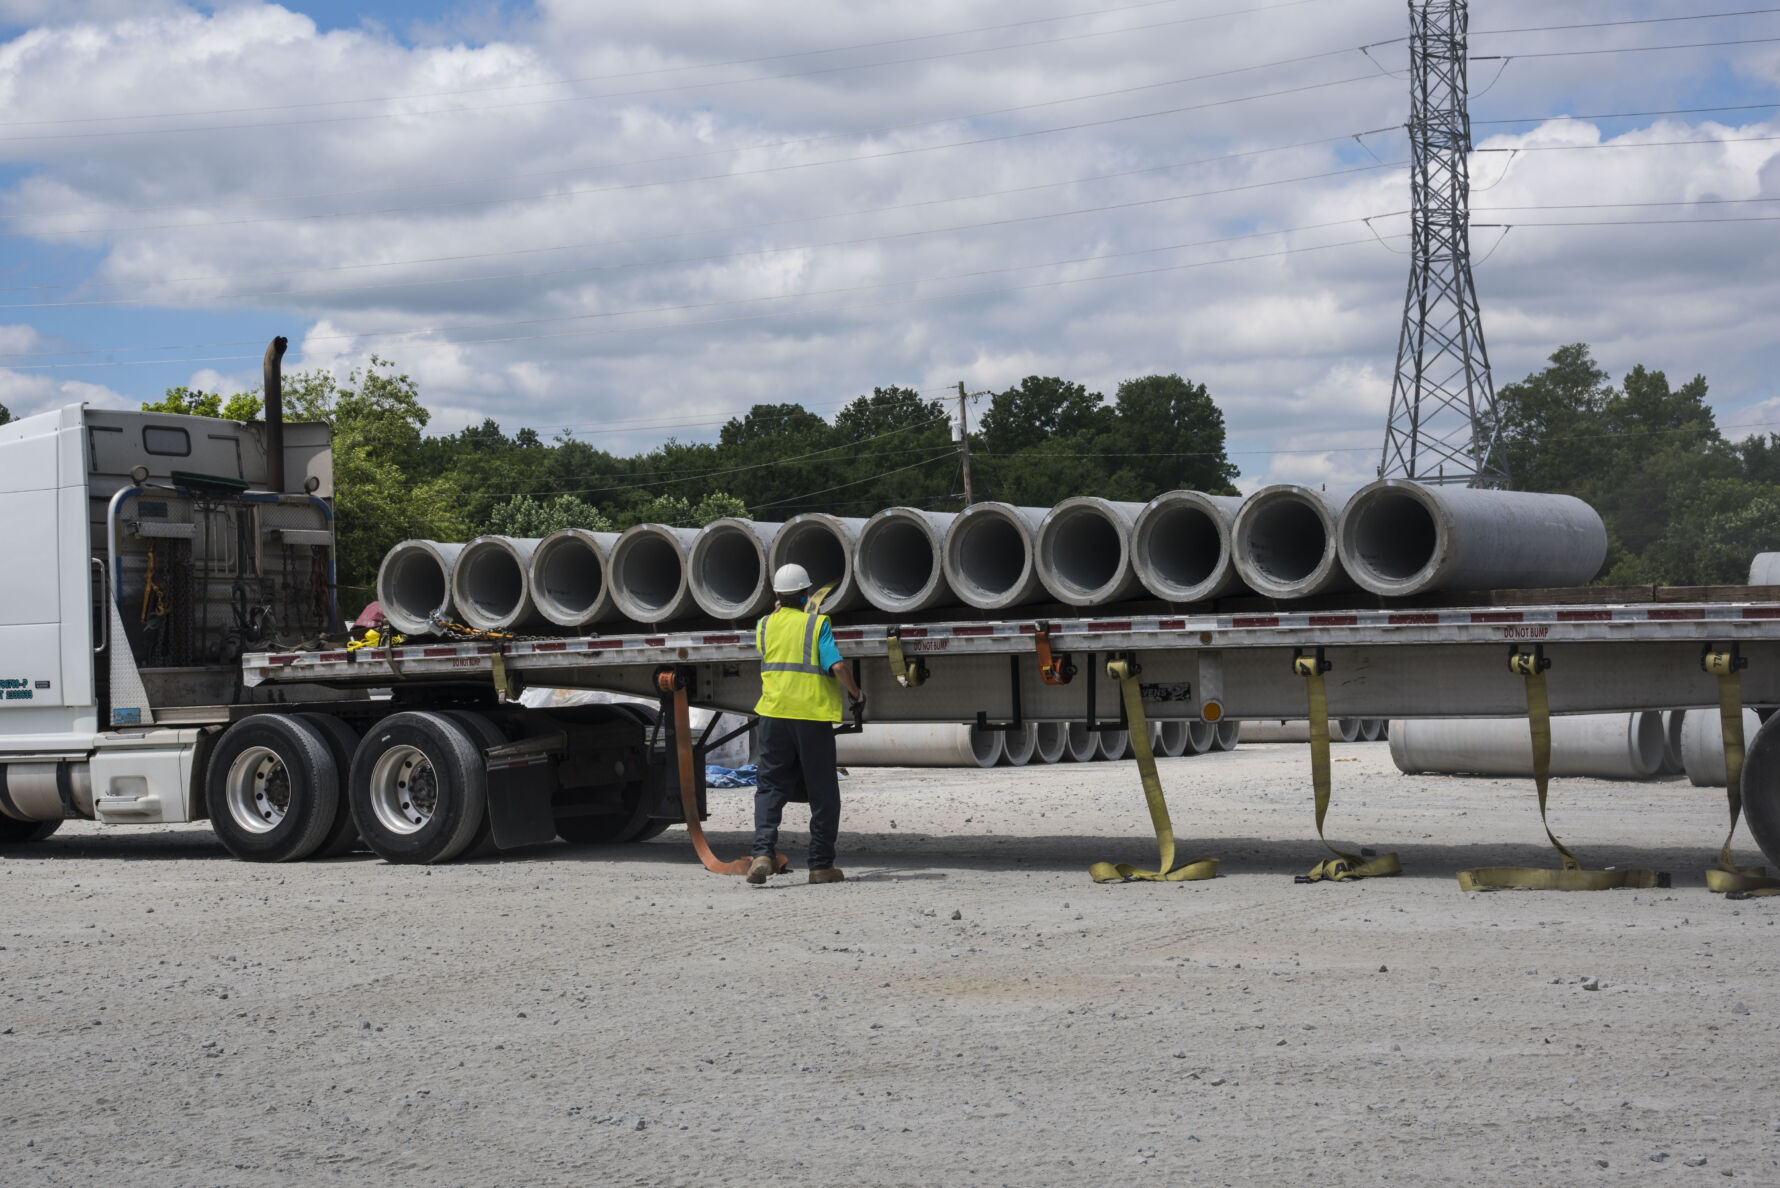 Johnson Concrete Products Reinforced Concrete Pipe being transported from the Salisbury, NC Plant